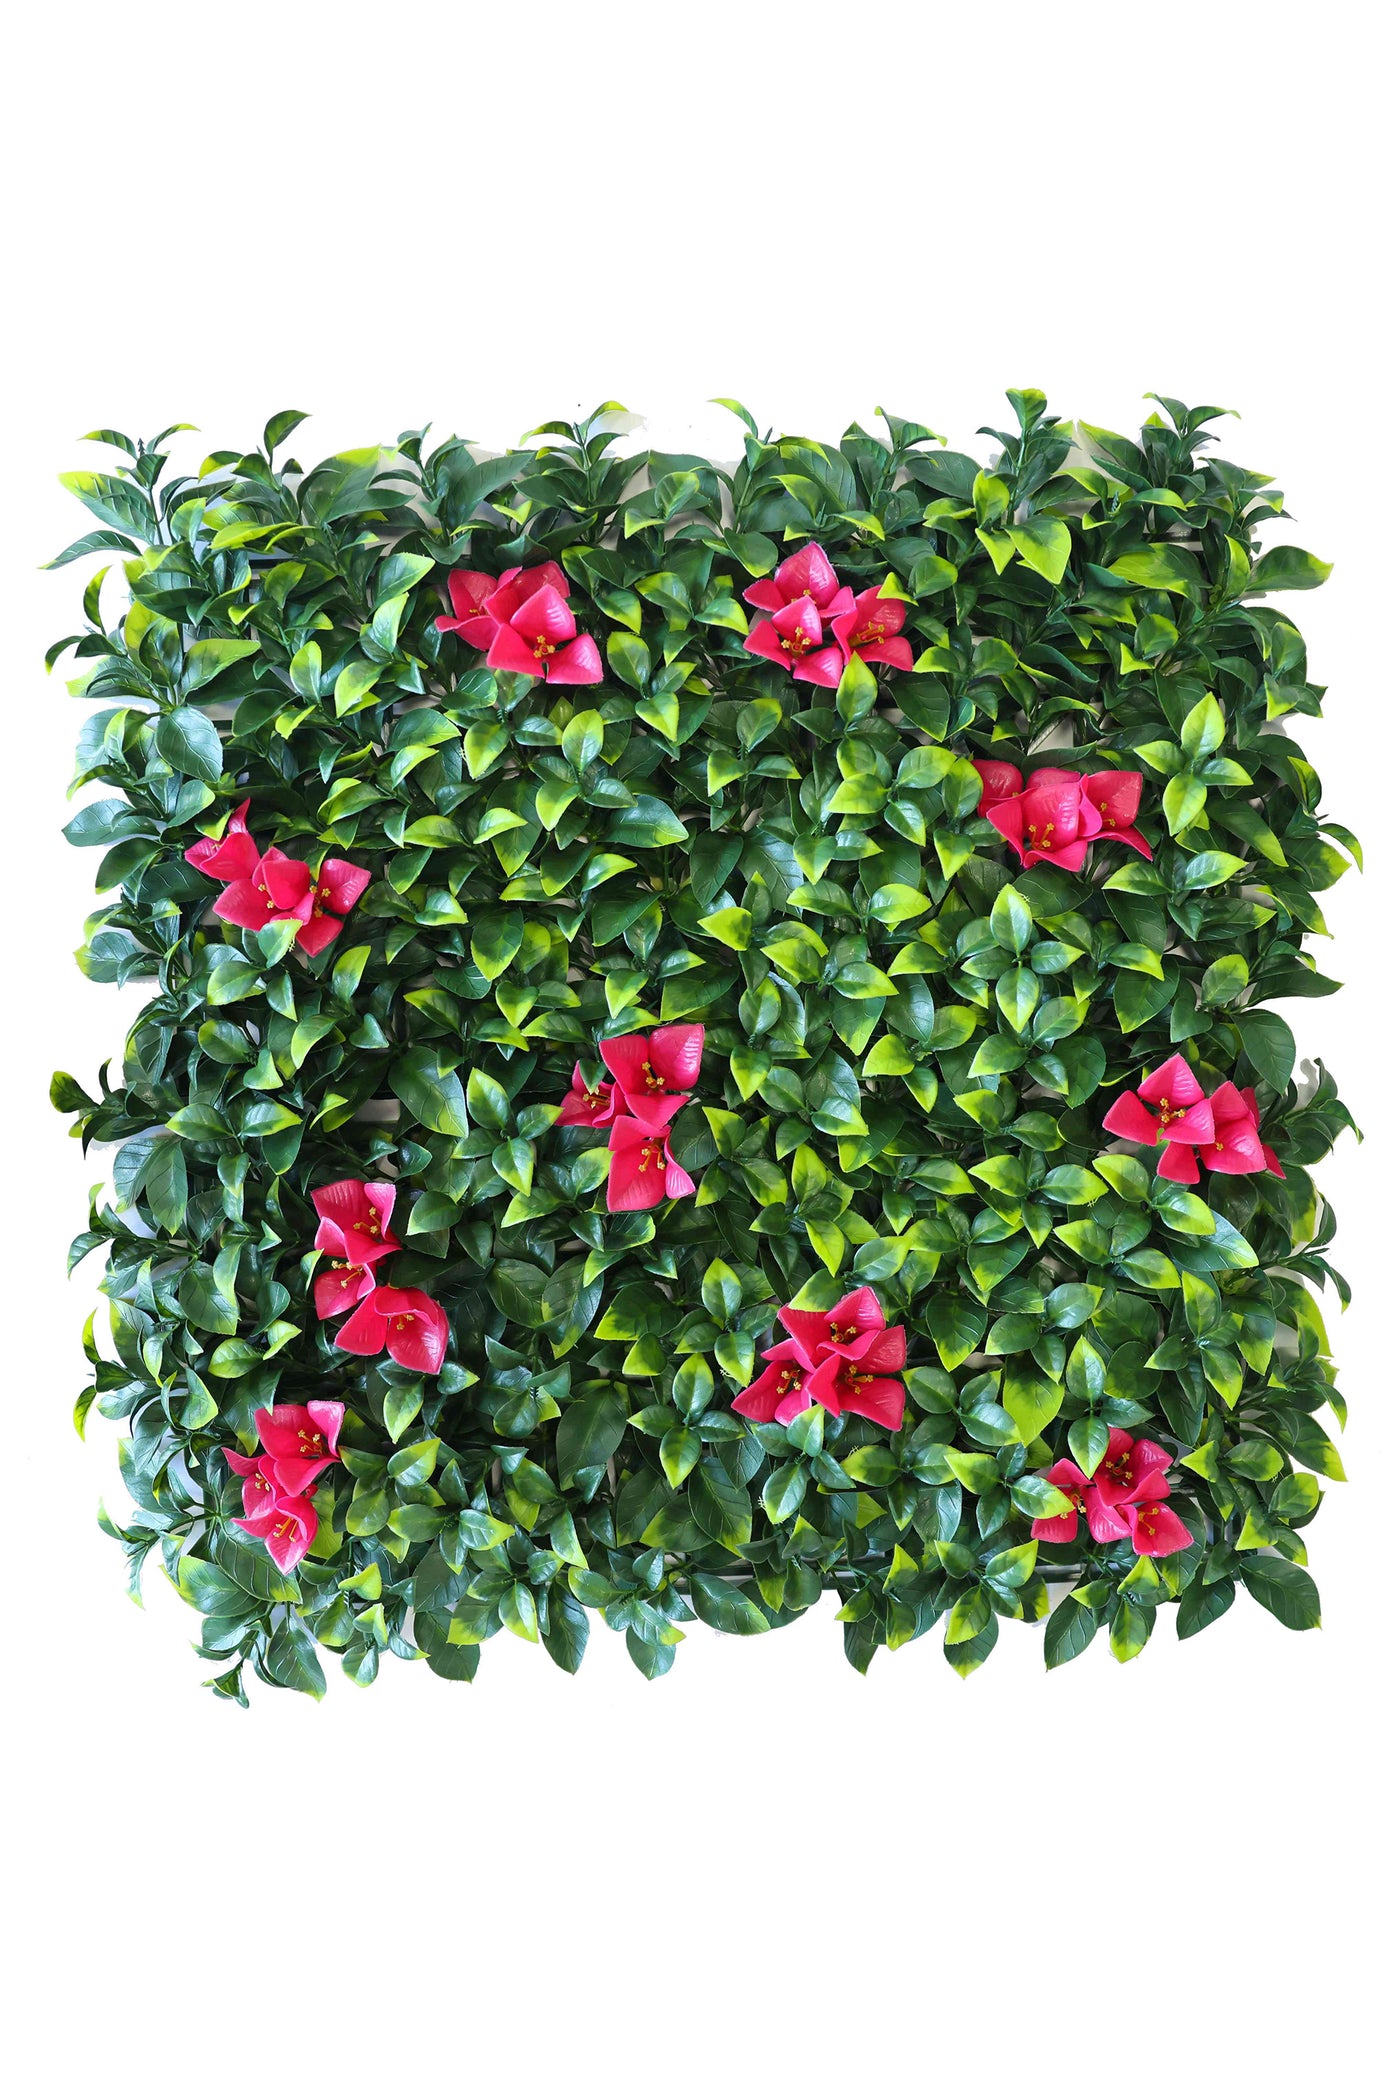 Blossom Pink Flowers With Long Lush Green Leaves Artificial Vertical Garden Wall Tile (Pack of 1)